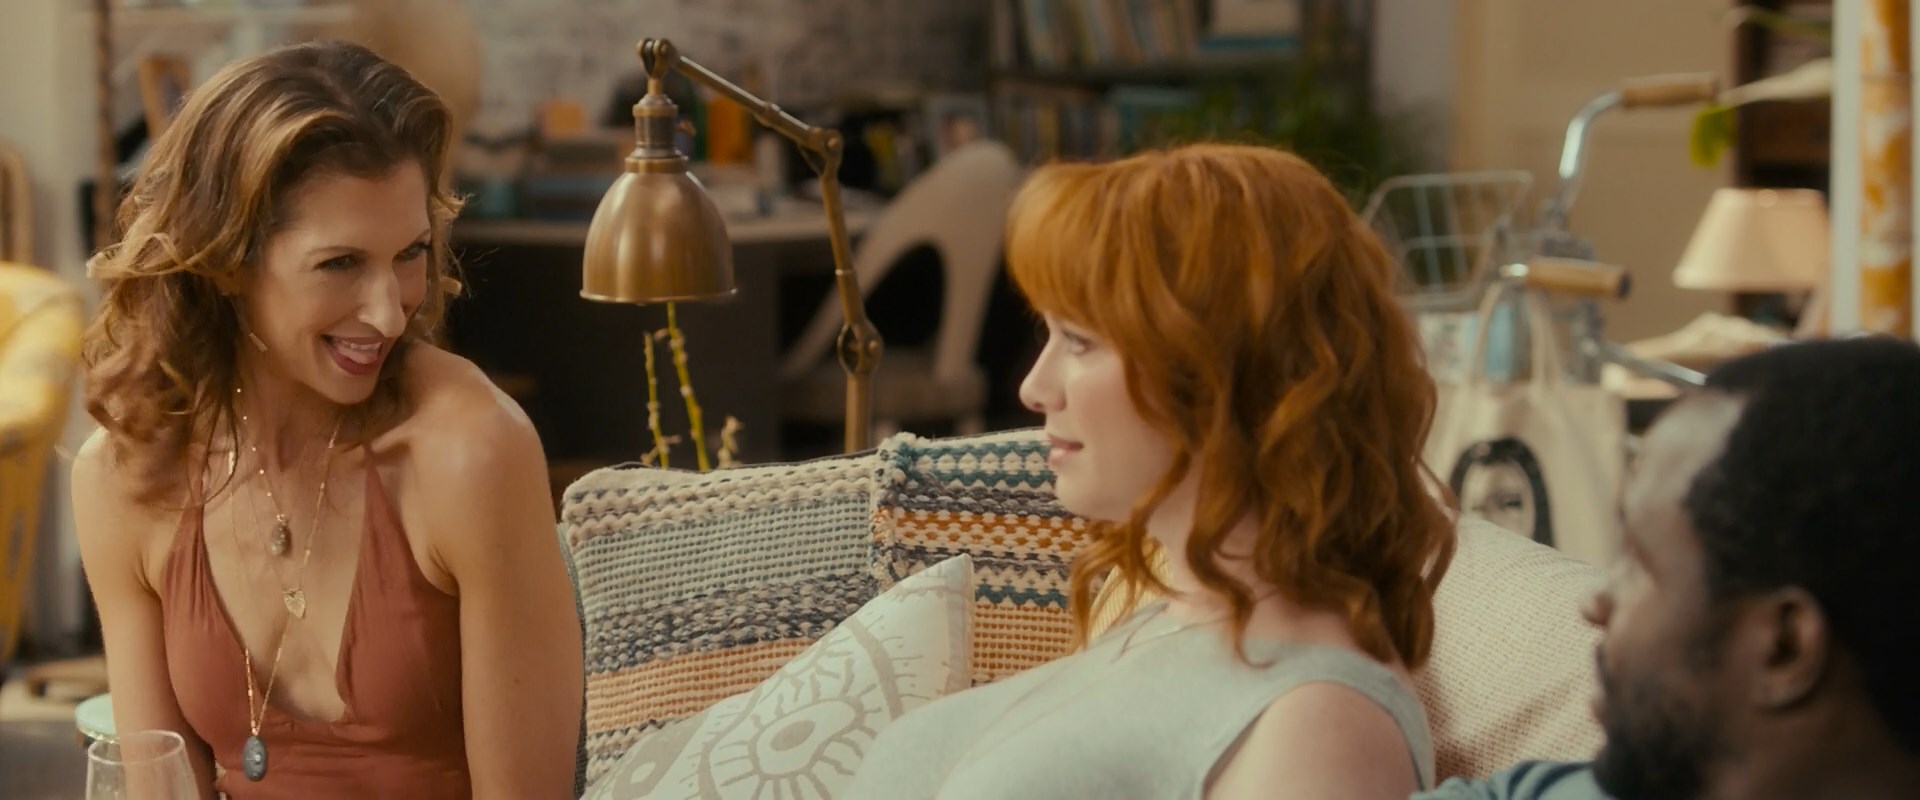 Get Ready to Be Swept Away by Christina Hendricks in These Erotic Scenes